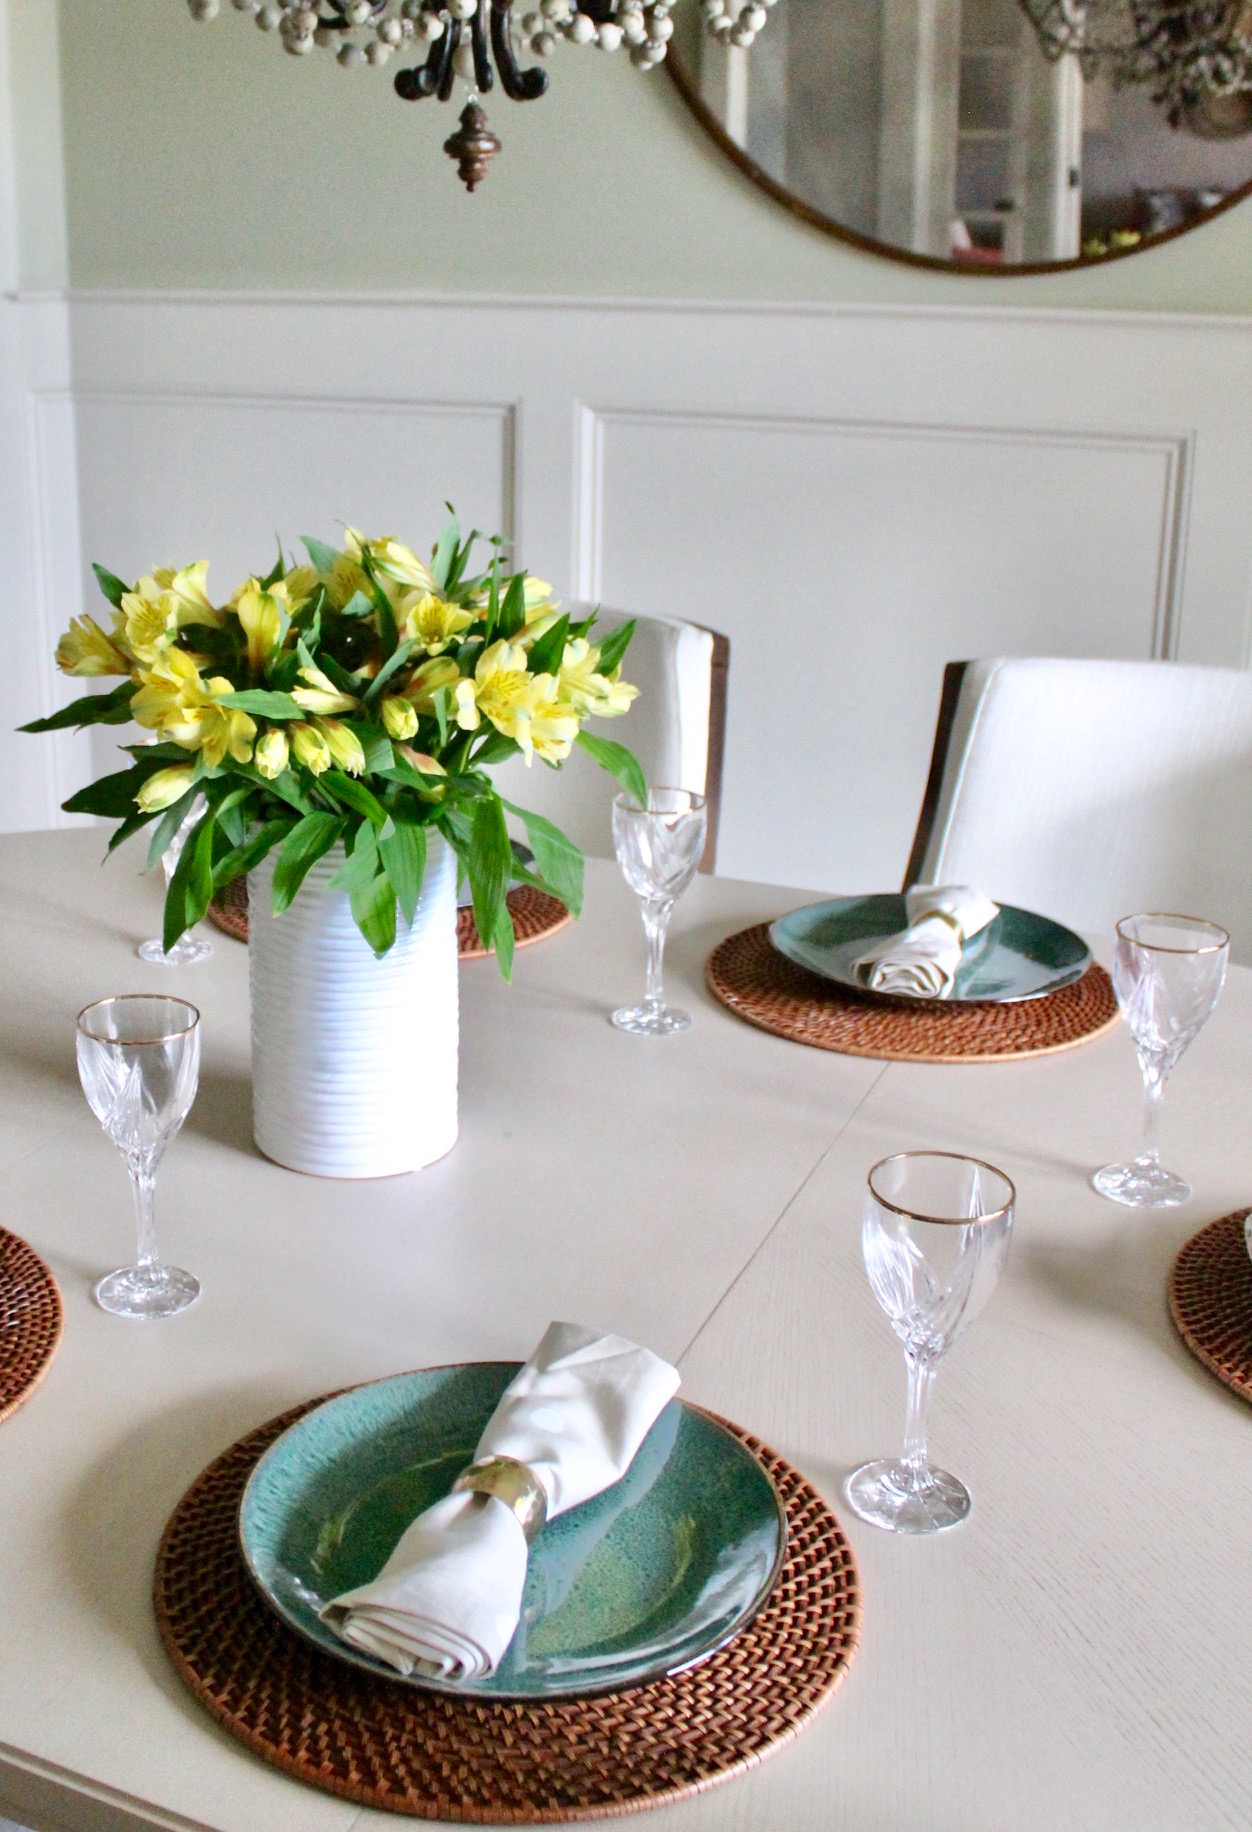 Tablesetting by Erika Ward Interiors